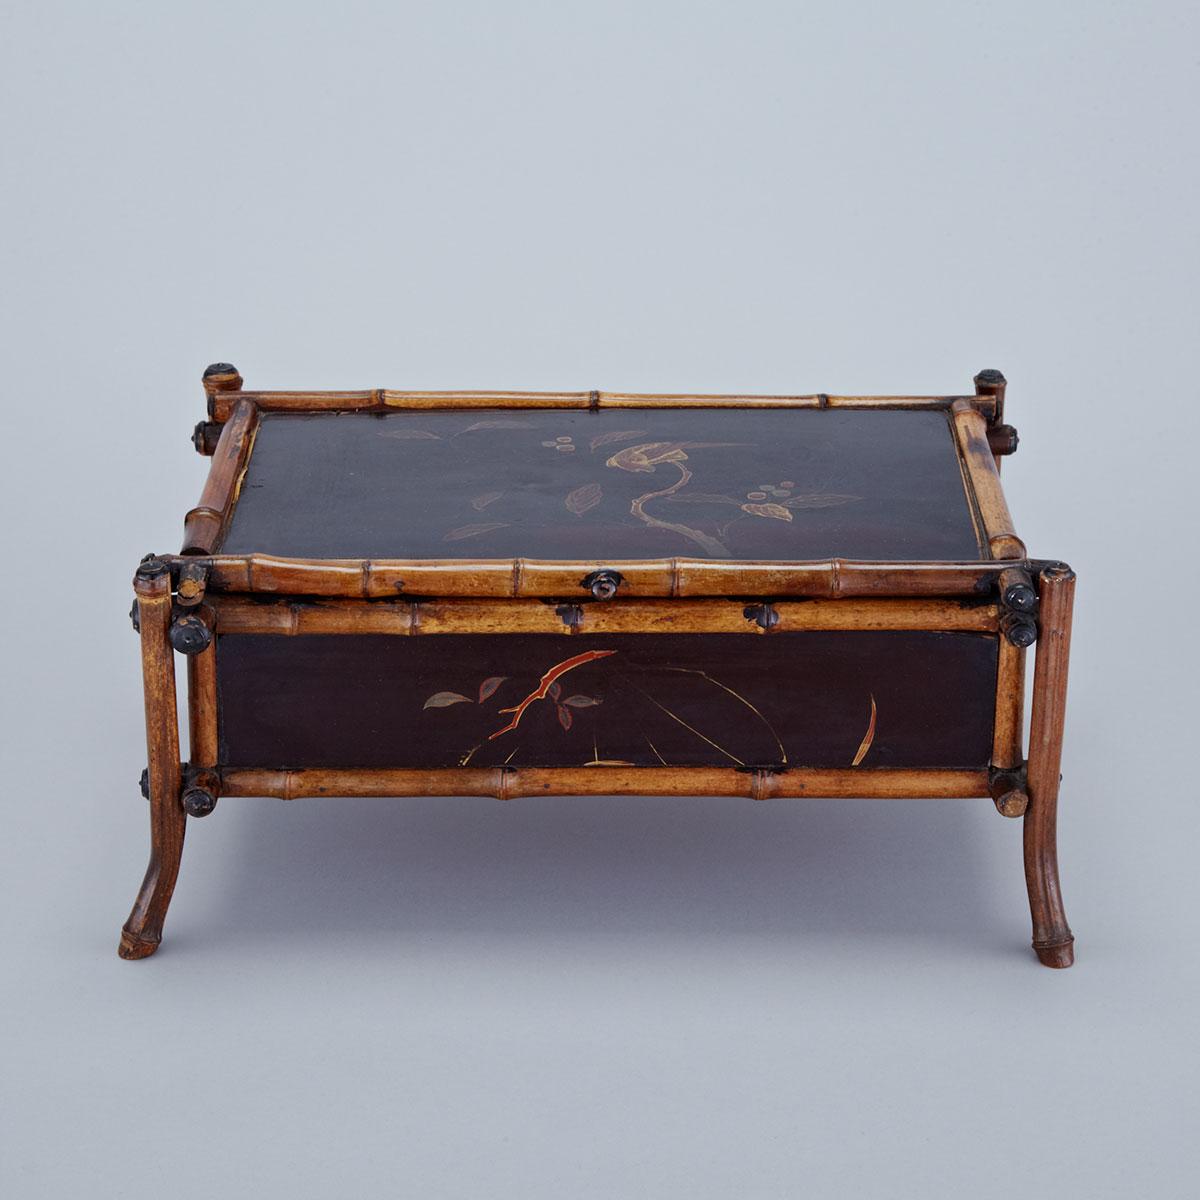 French Black Japanned and Bamboo  Work Casket, mid 19th century